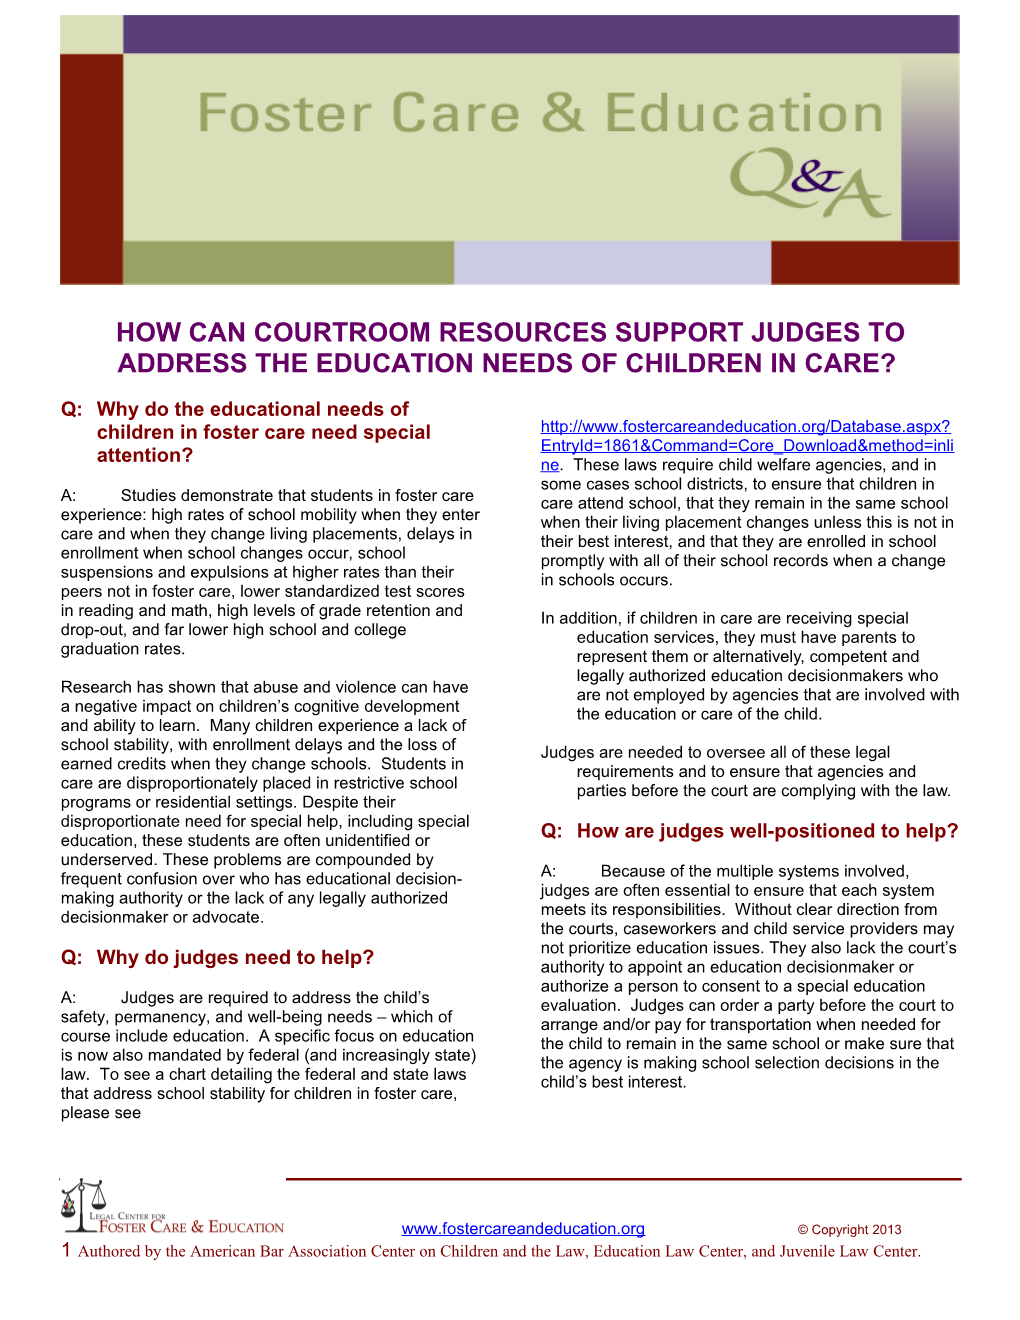 How Can Courtroom Resources Support Judges to Address the Education Needs of Children in Care?